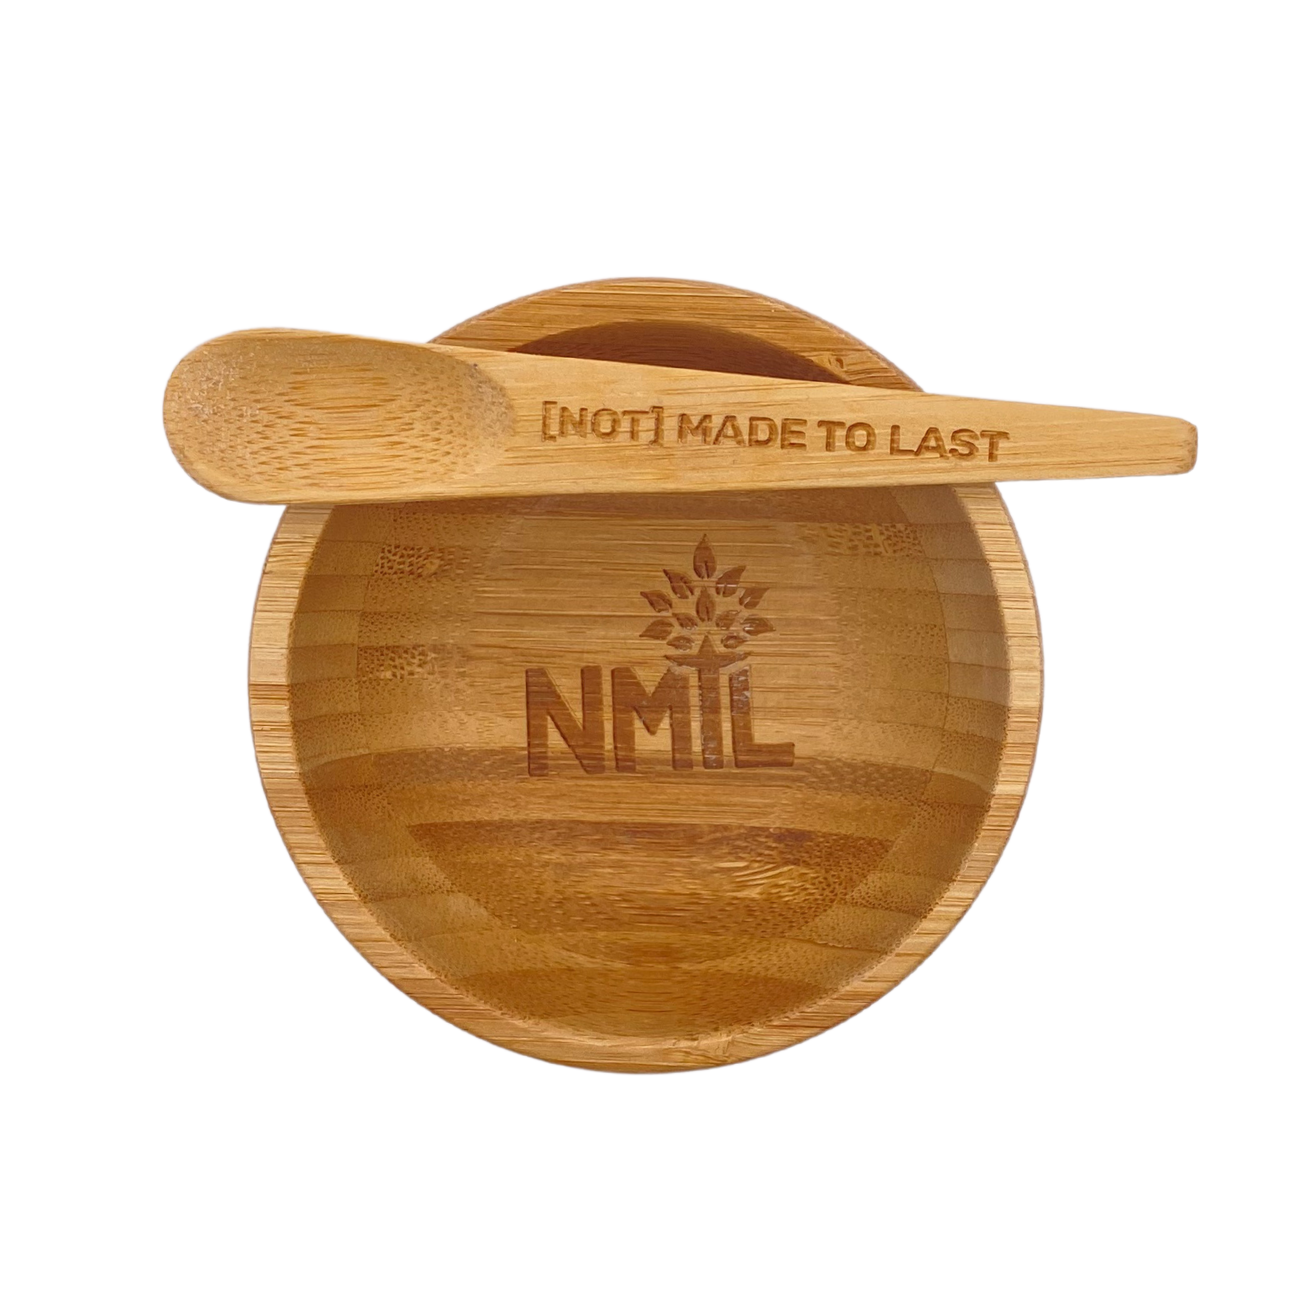 Bamboo mixing bowl and spoon engraved with the NMTL logo or text